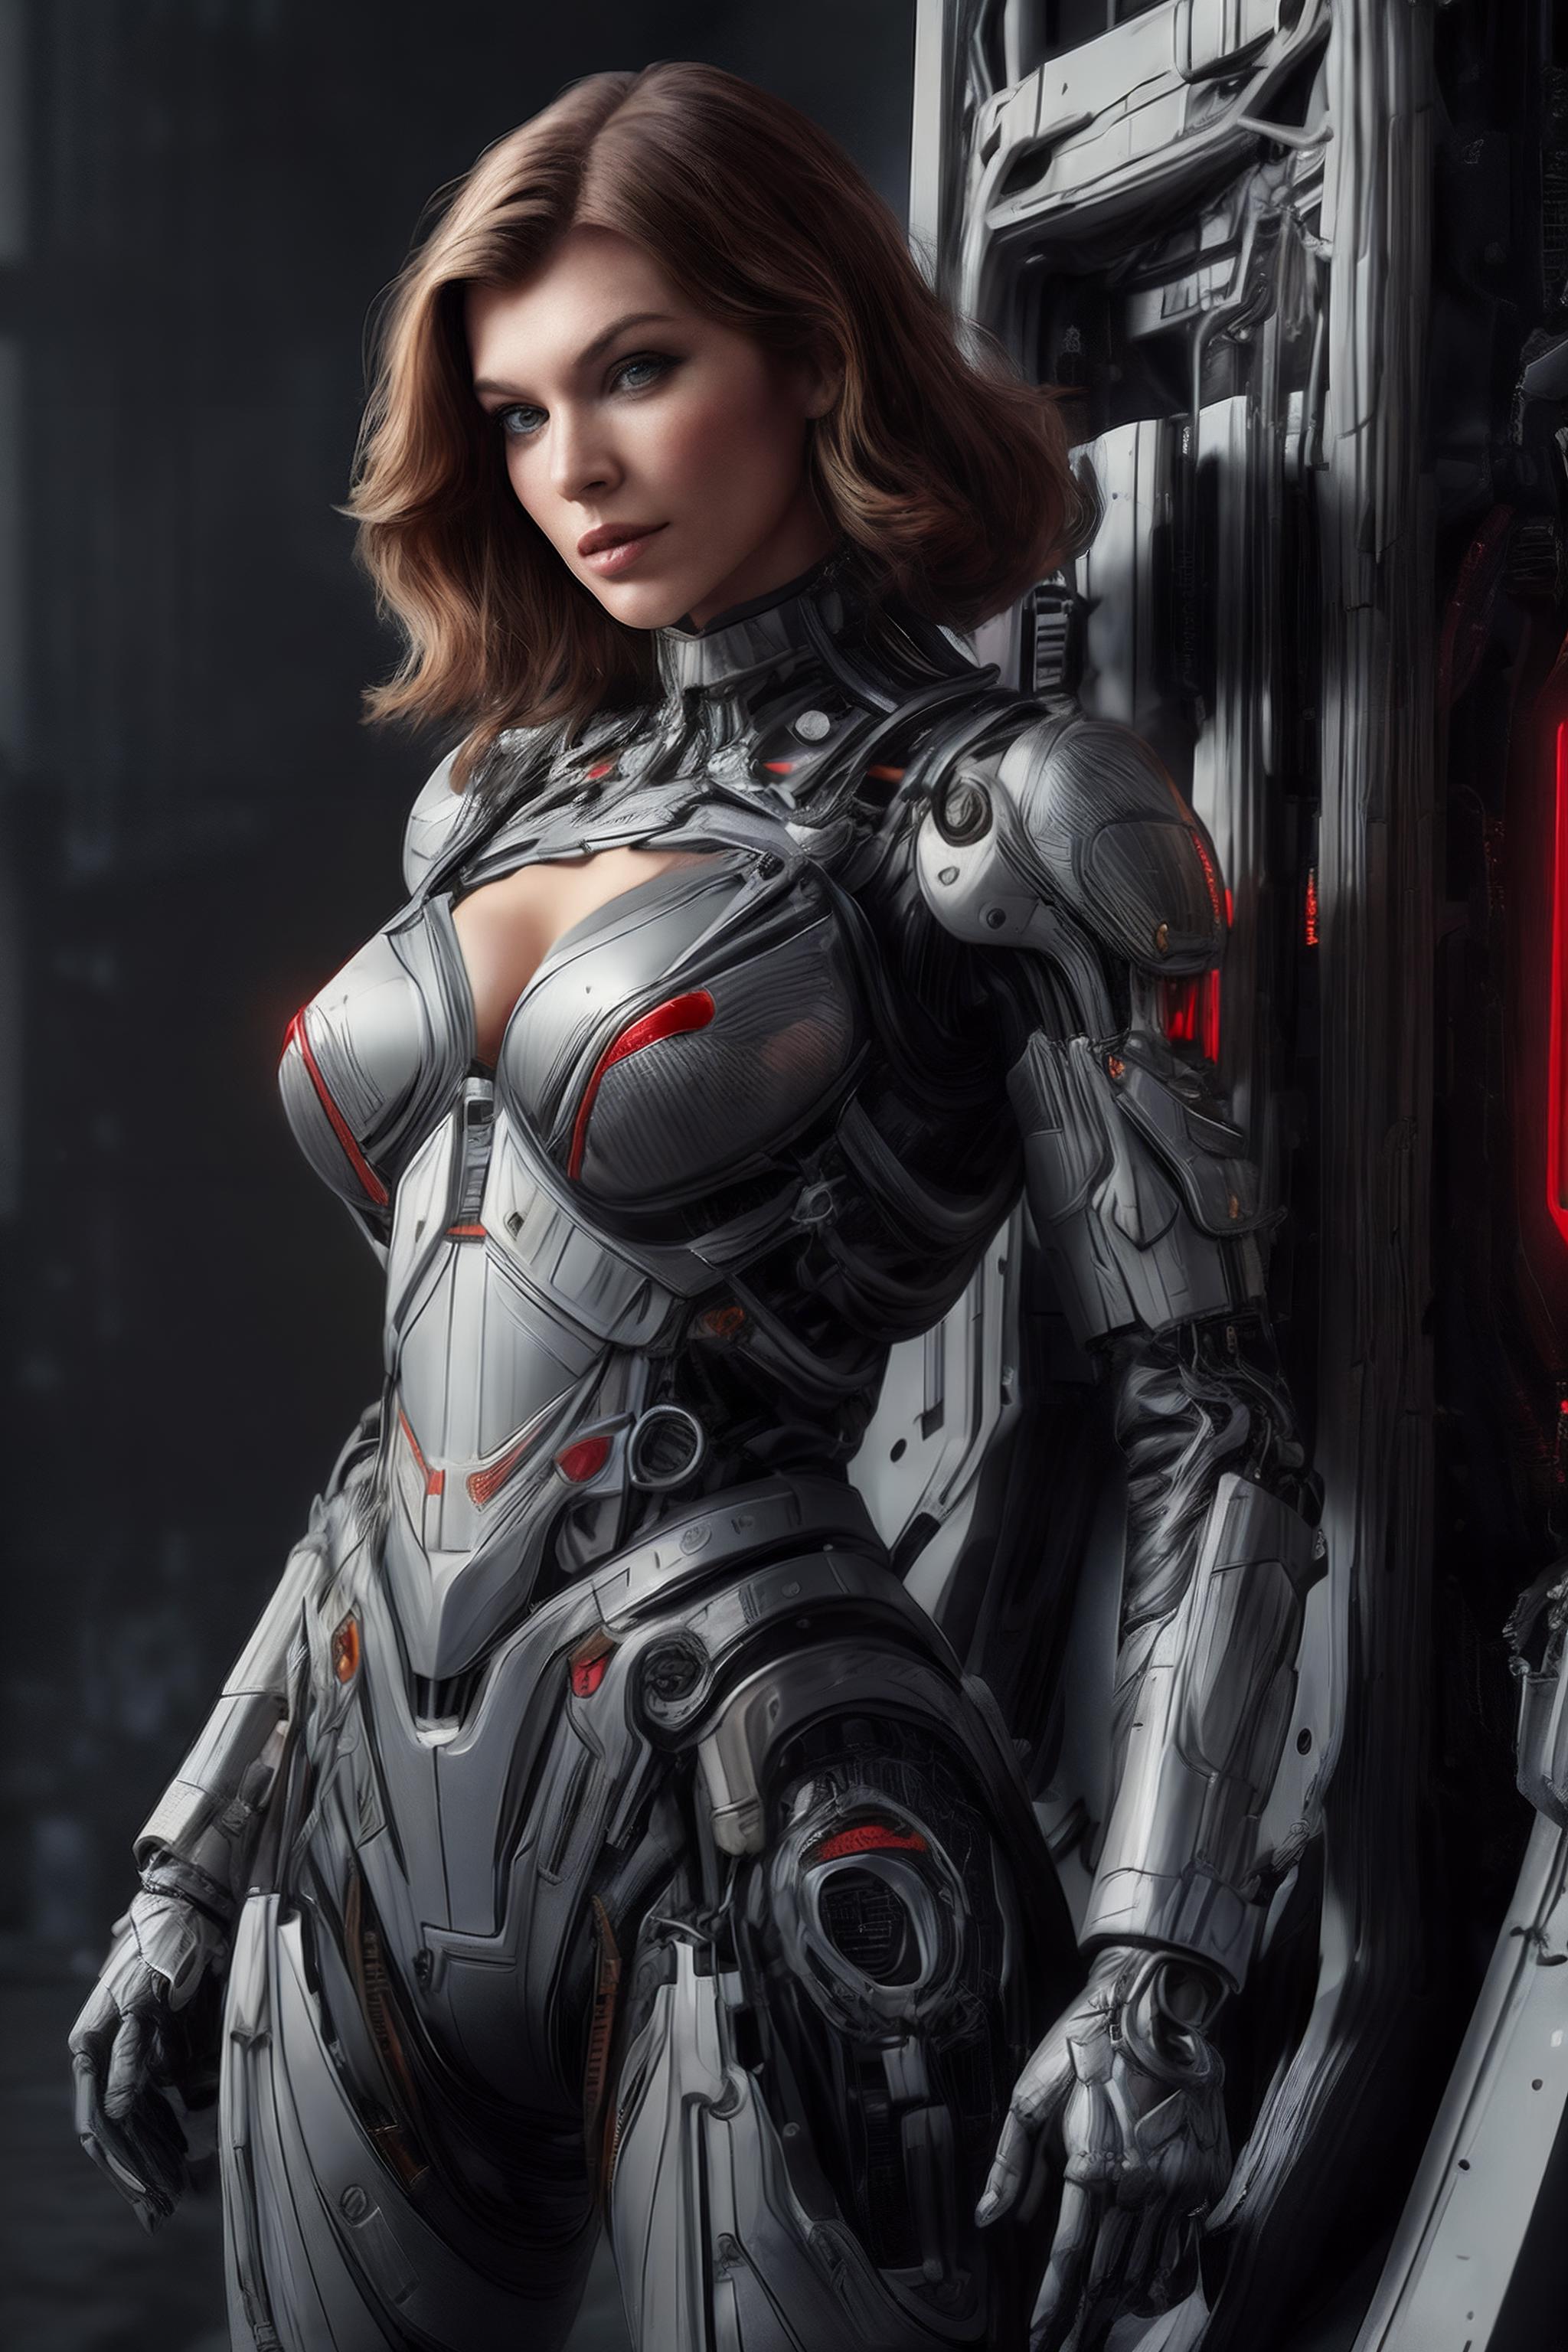 A beautiful female robot with a metallic suit and red accents on her chest.